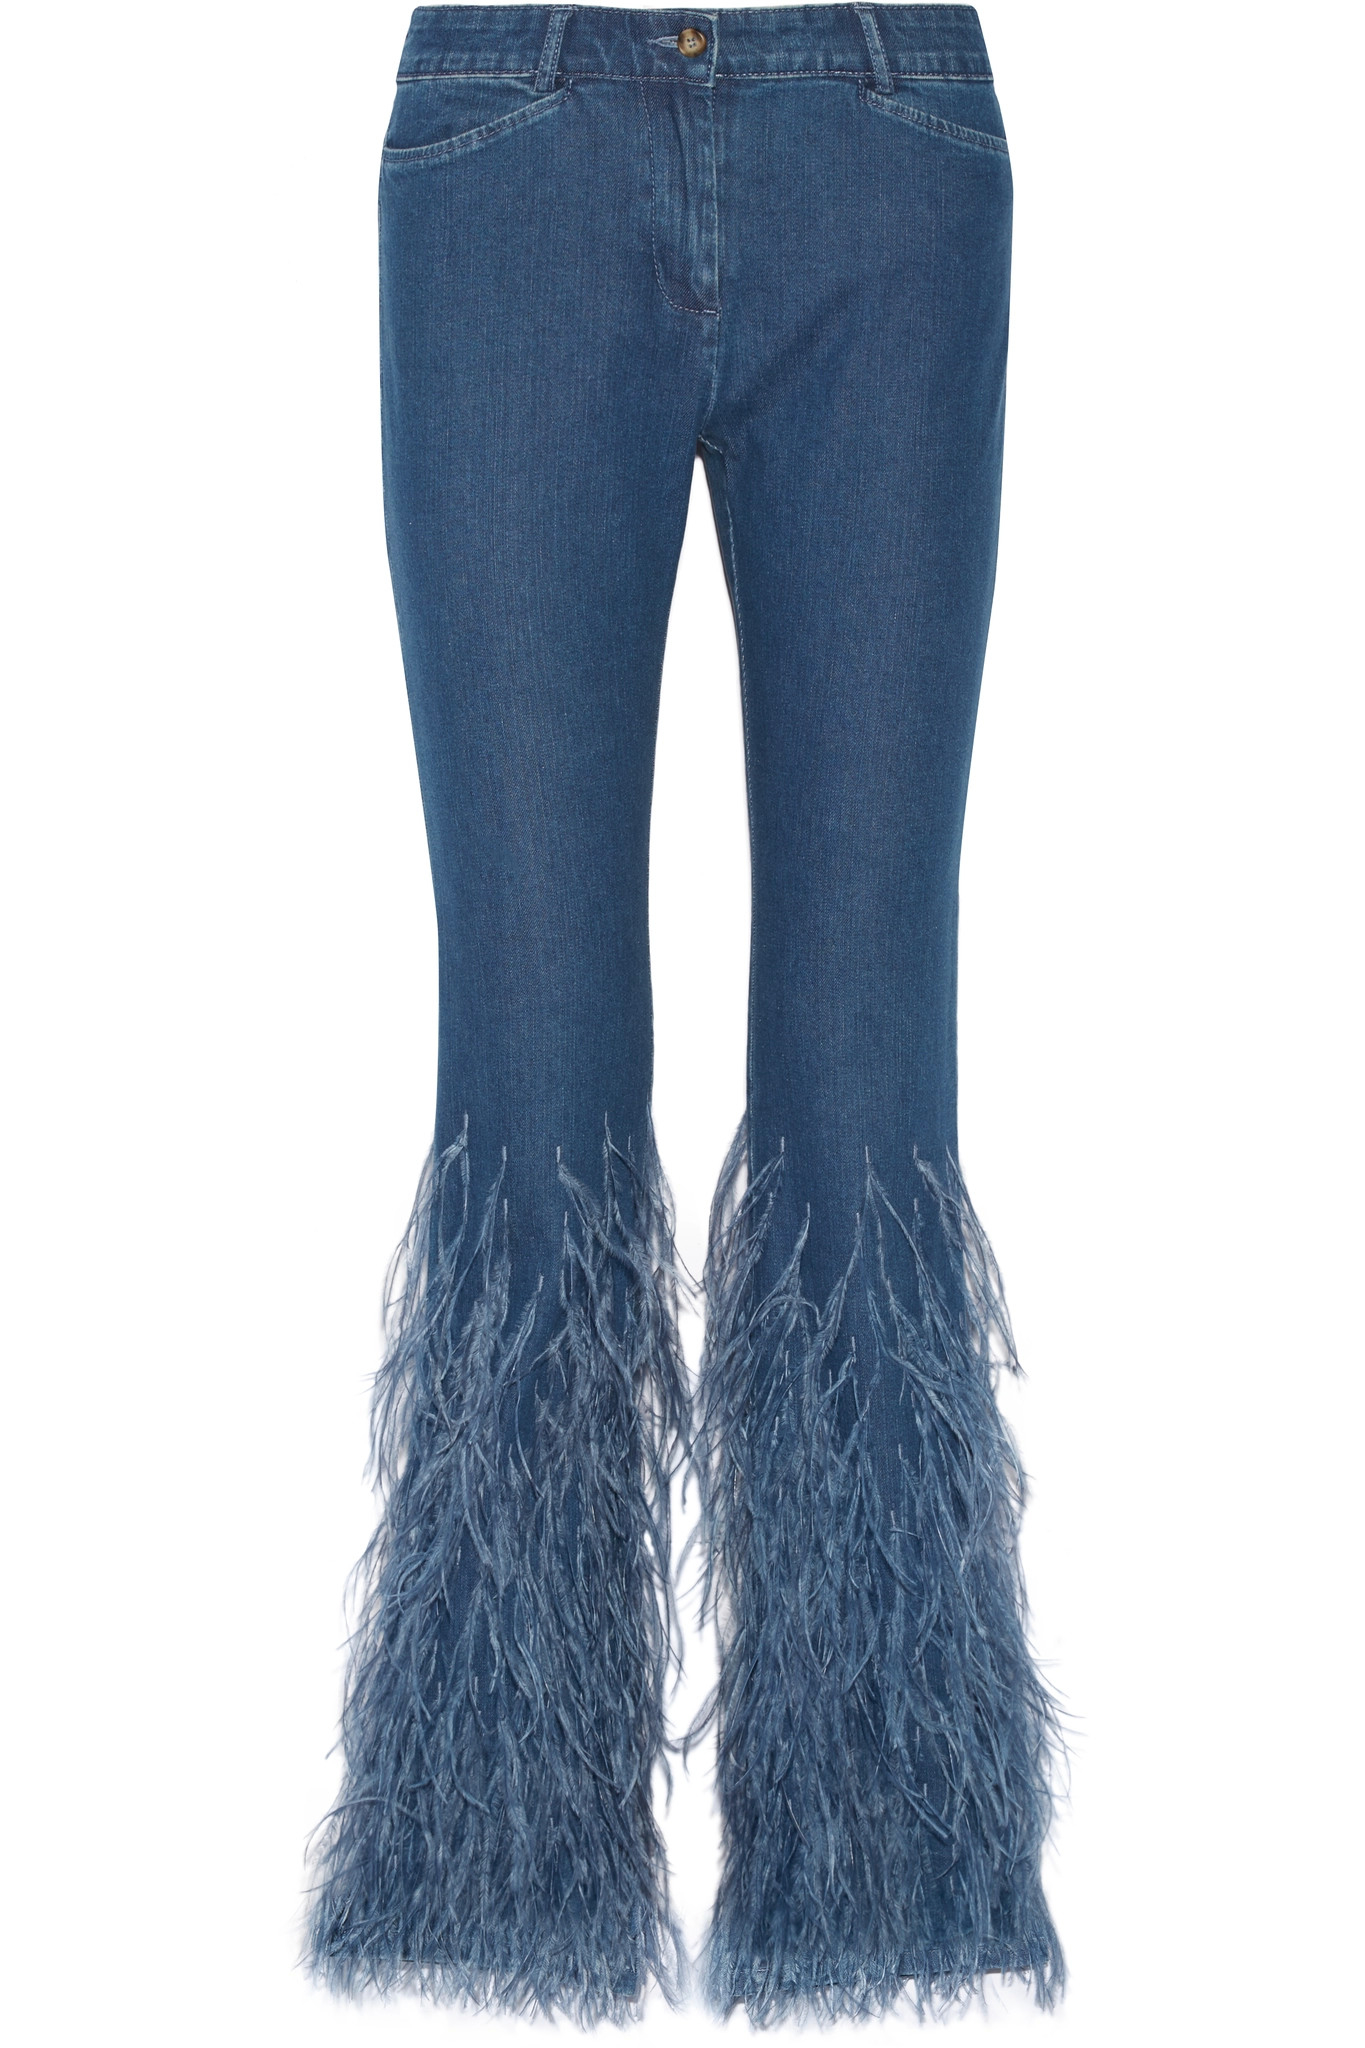 Michael Kors Denim Feather-trimmed Mid-rise Flared Jeans in Mid Denim  (Blue) - Lyst